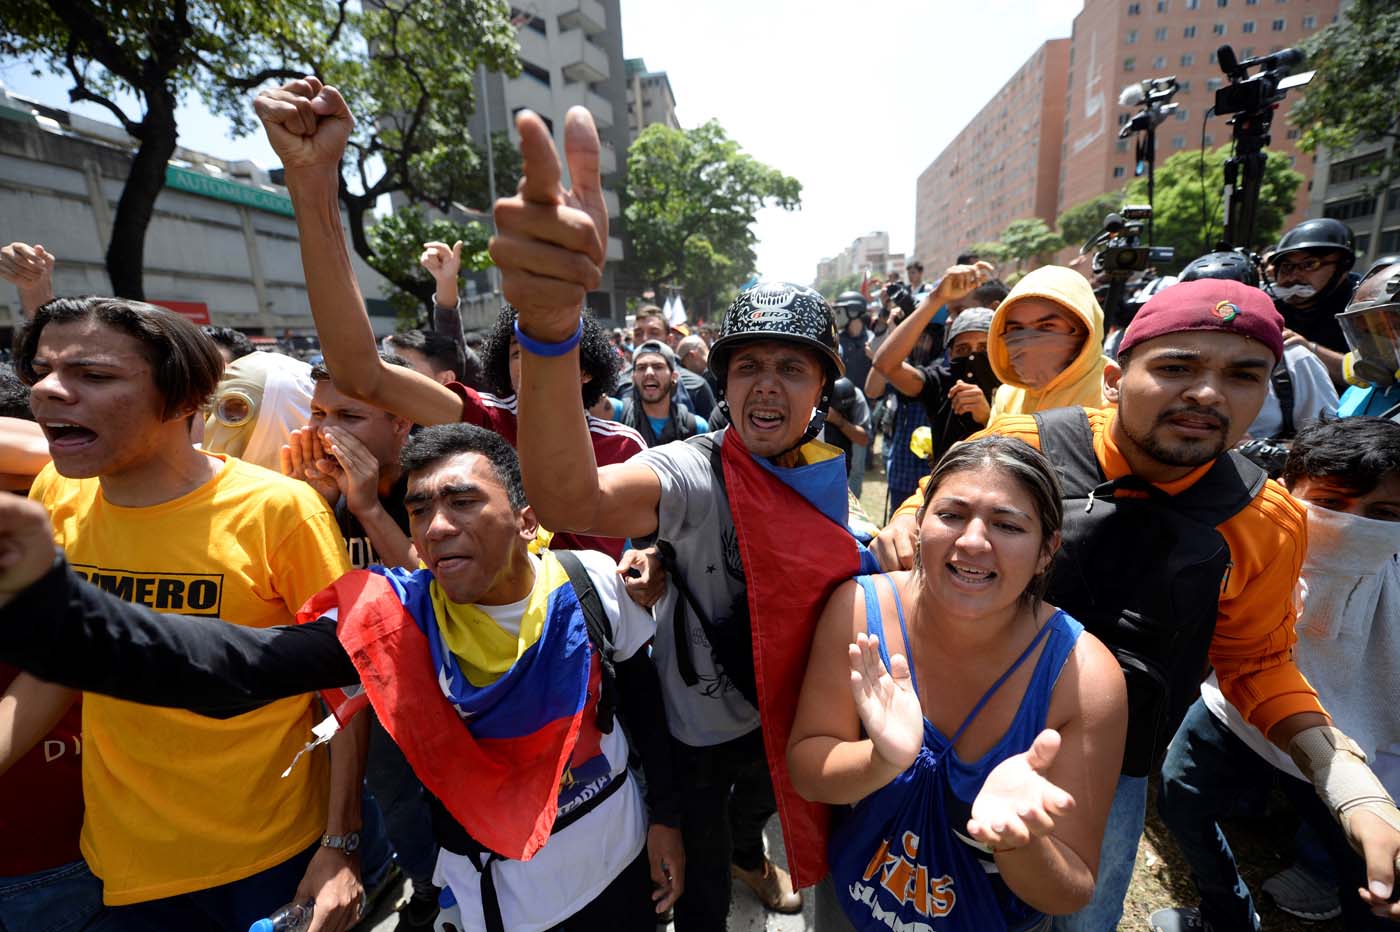 Venezuelan opposition activists demonstrate during a protest in Caracas on April 4, 2017. Venezuela has been mired in turmoil since the Supreme Court last week tried to tighten Maduro's grip on power by assuming legislative powers from the National Assembly -- a move opponents had angrily branded as a 